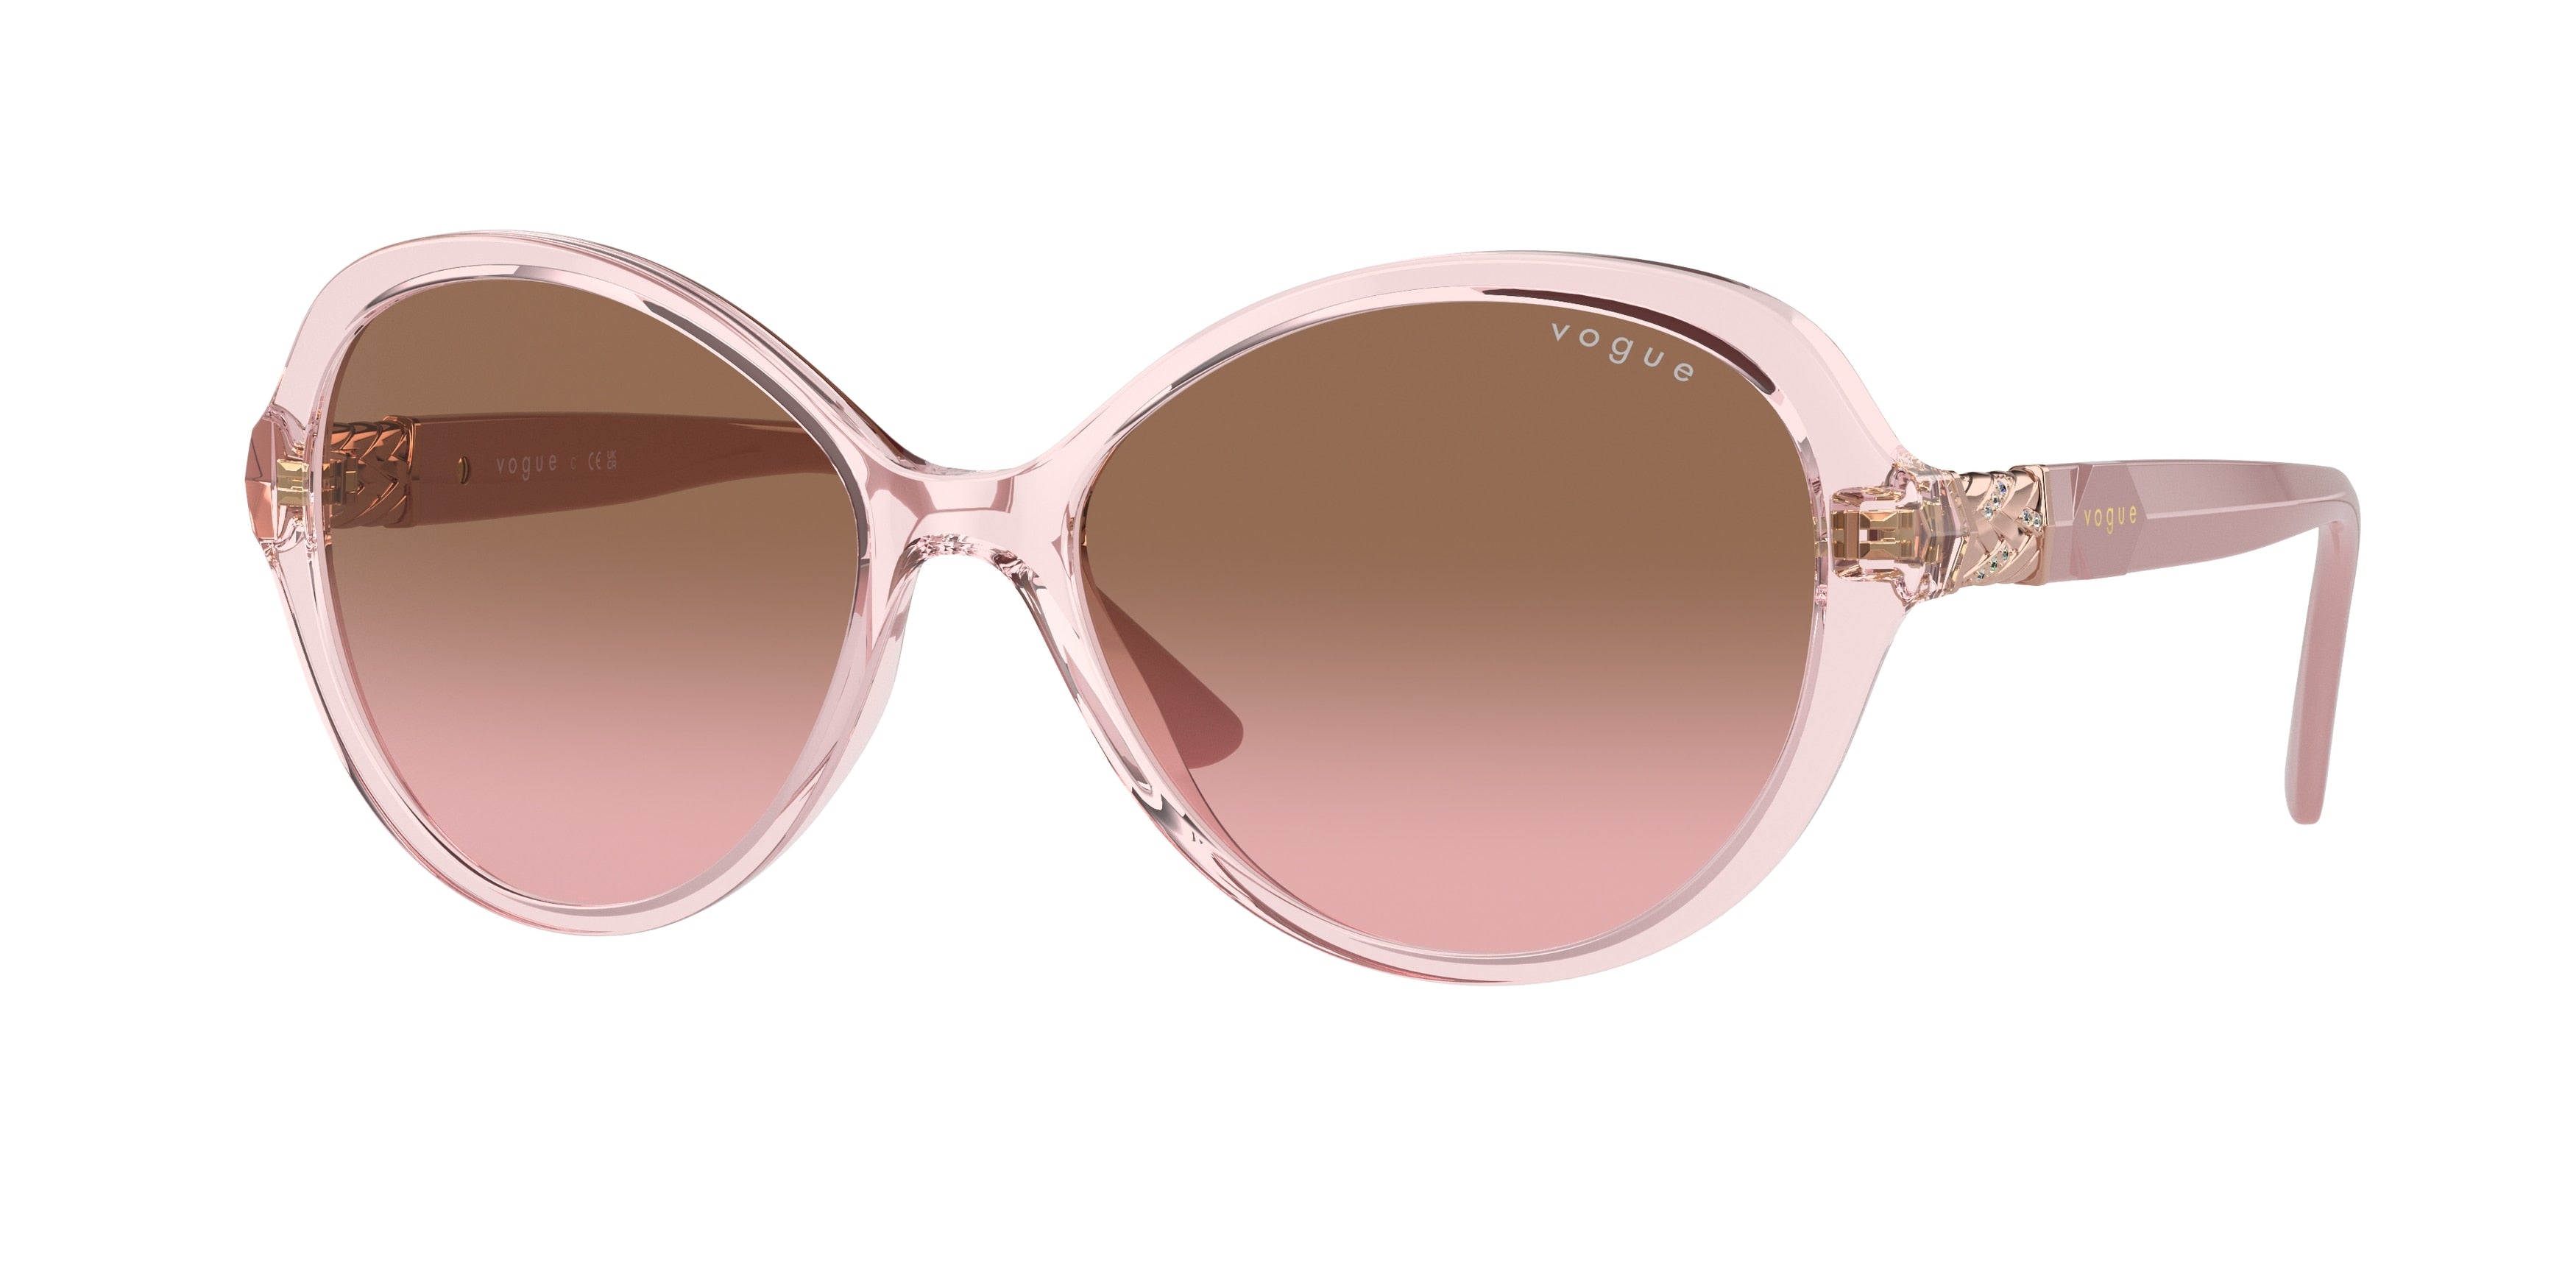 Vogue VO5475SB Butterfly Sunglasses  276314-Transparent Pink 57-140-16 - Color Map Pink